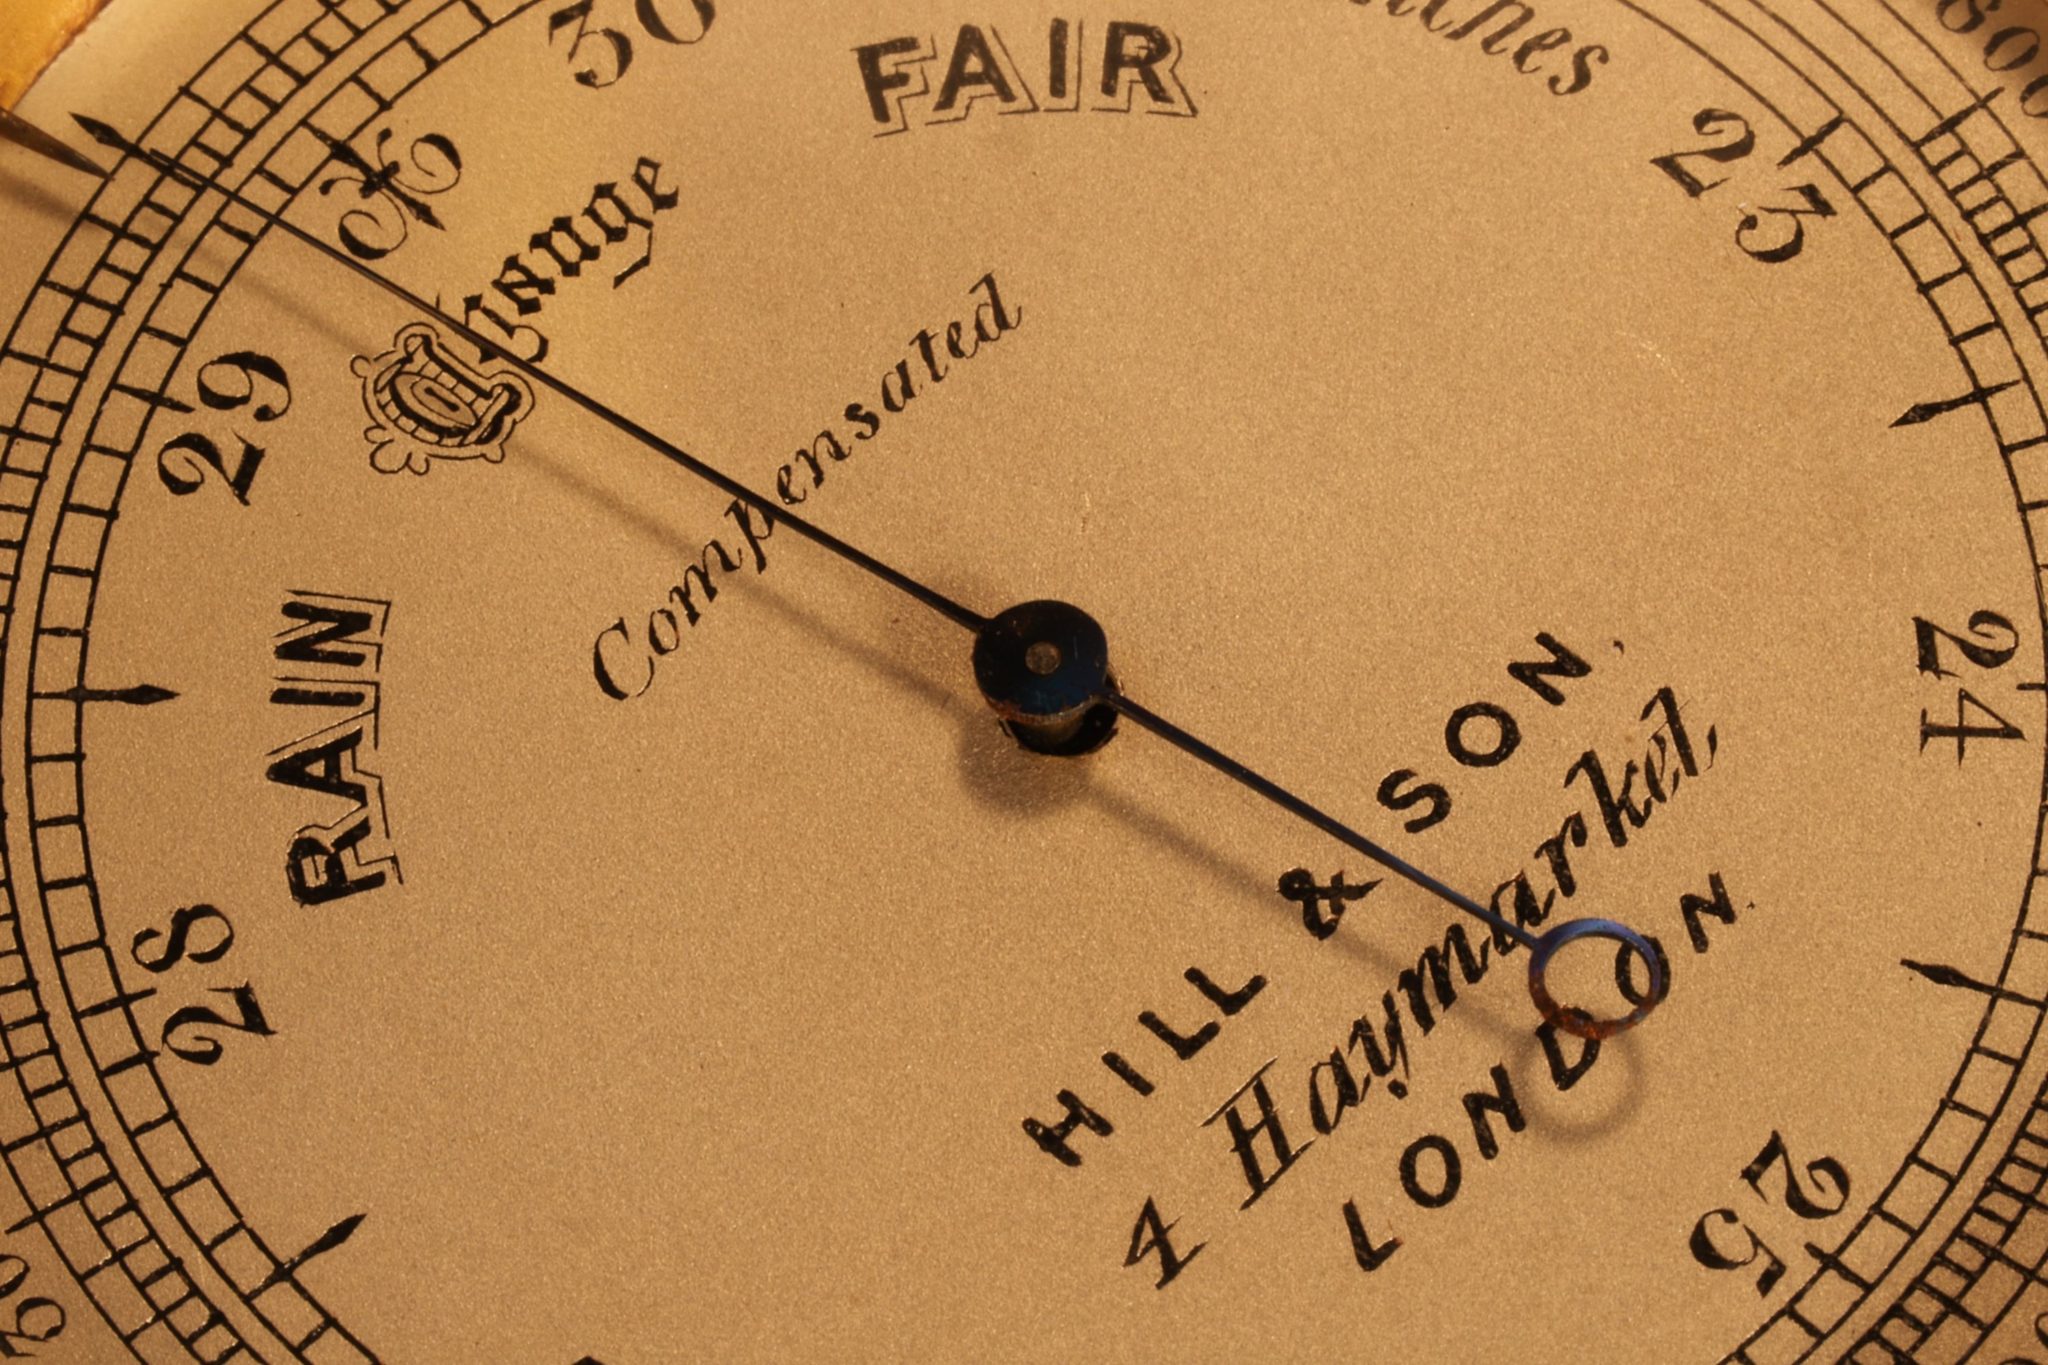 Image of Pocket Barometer Compendium by Dollond Retailed by Hill c1870